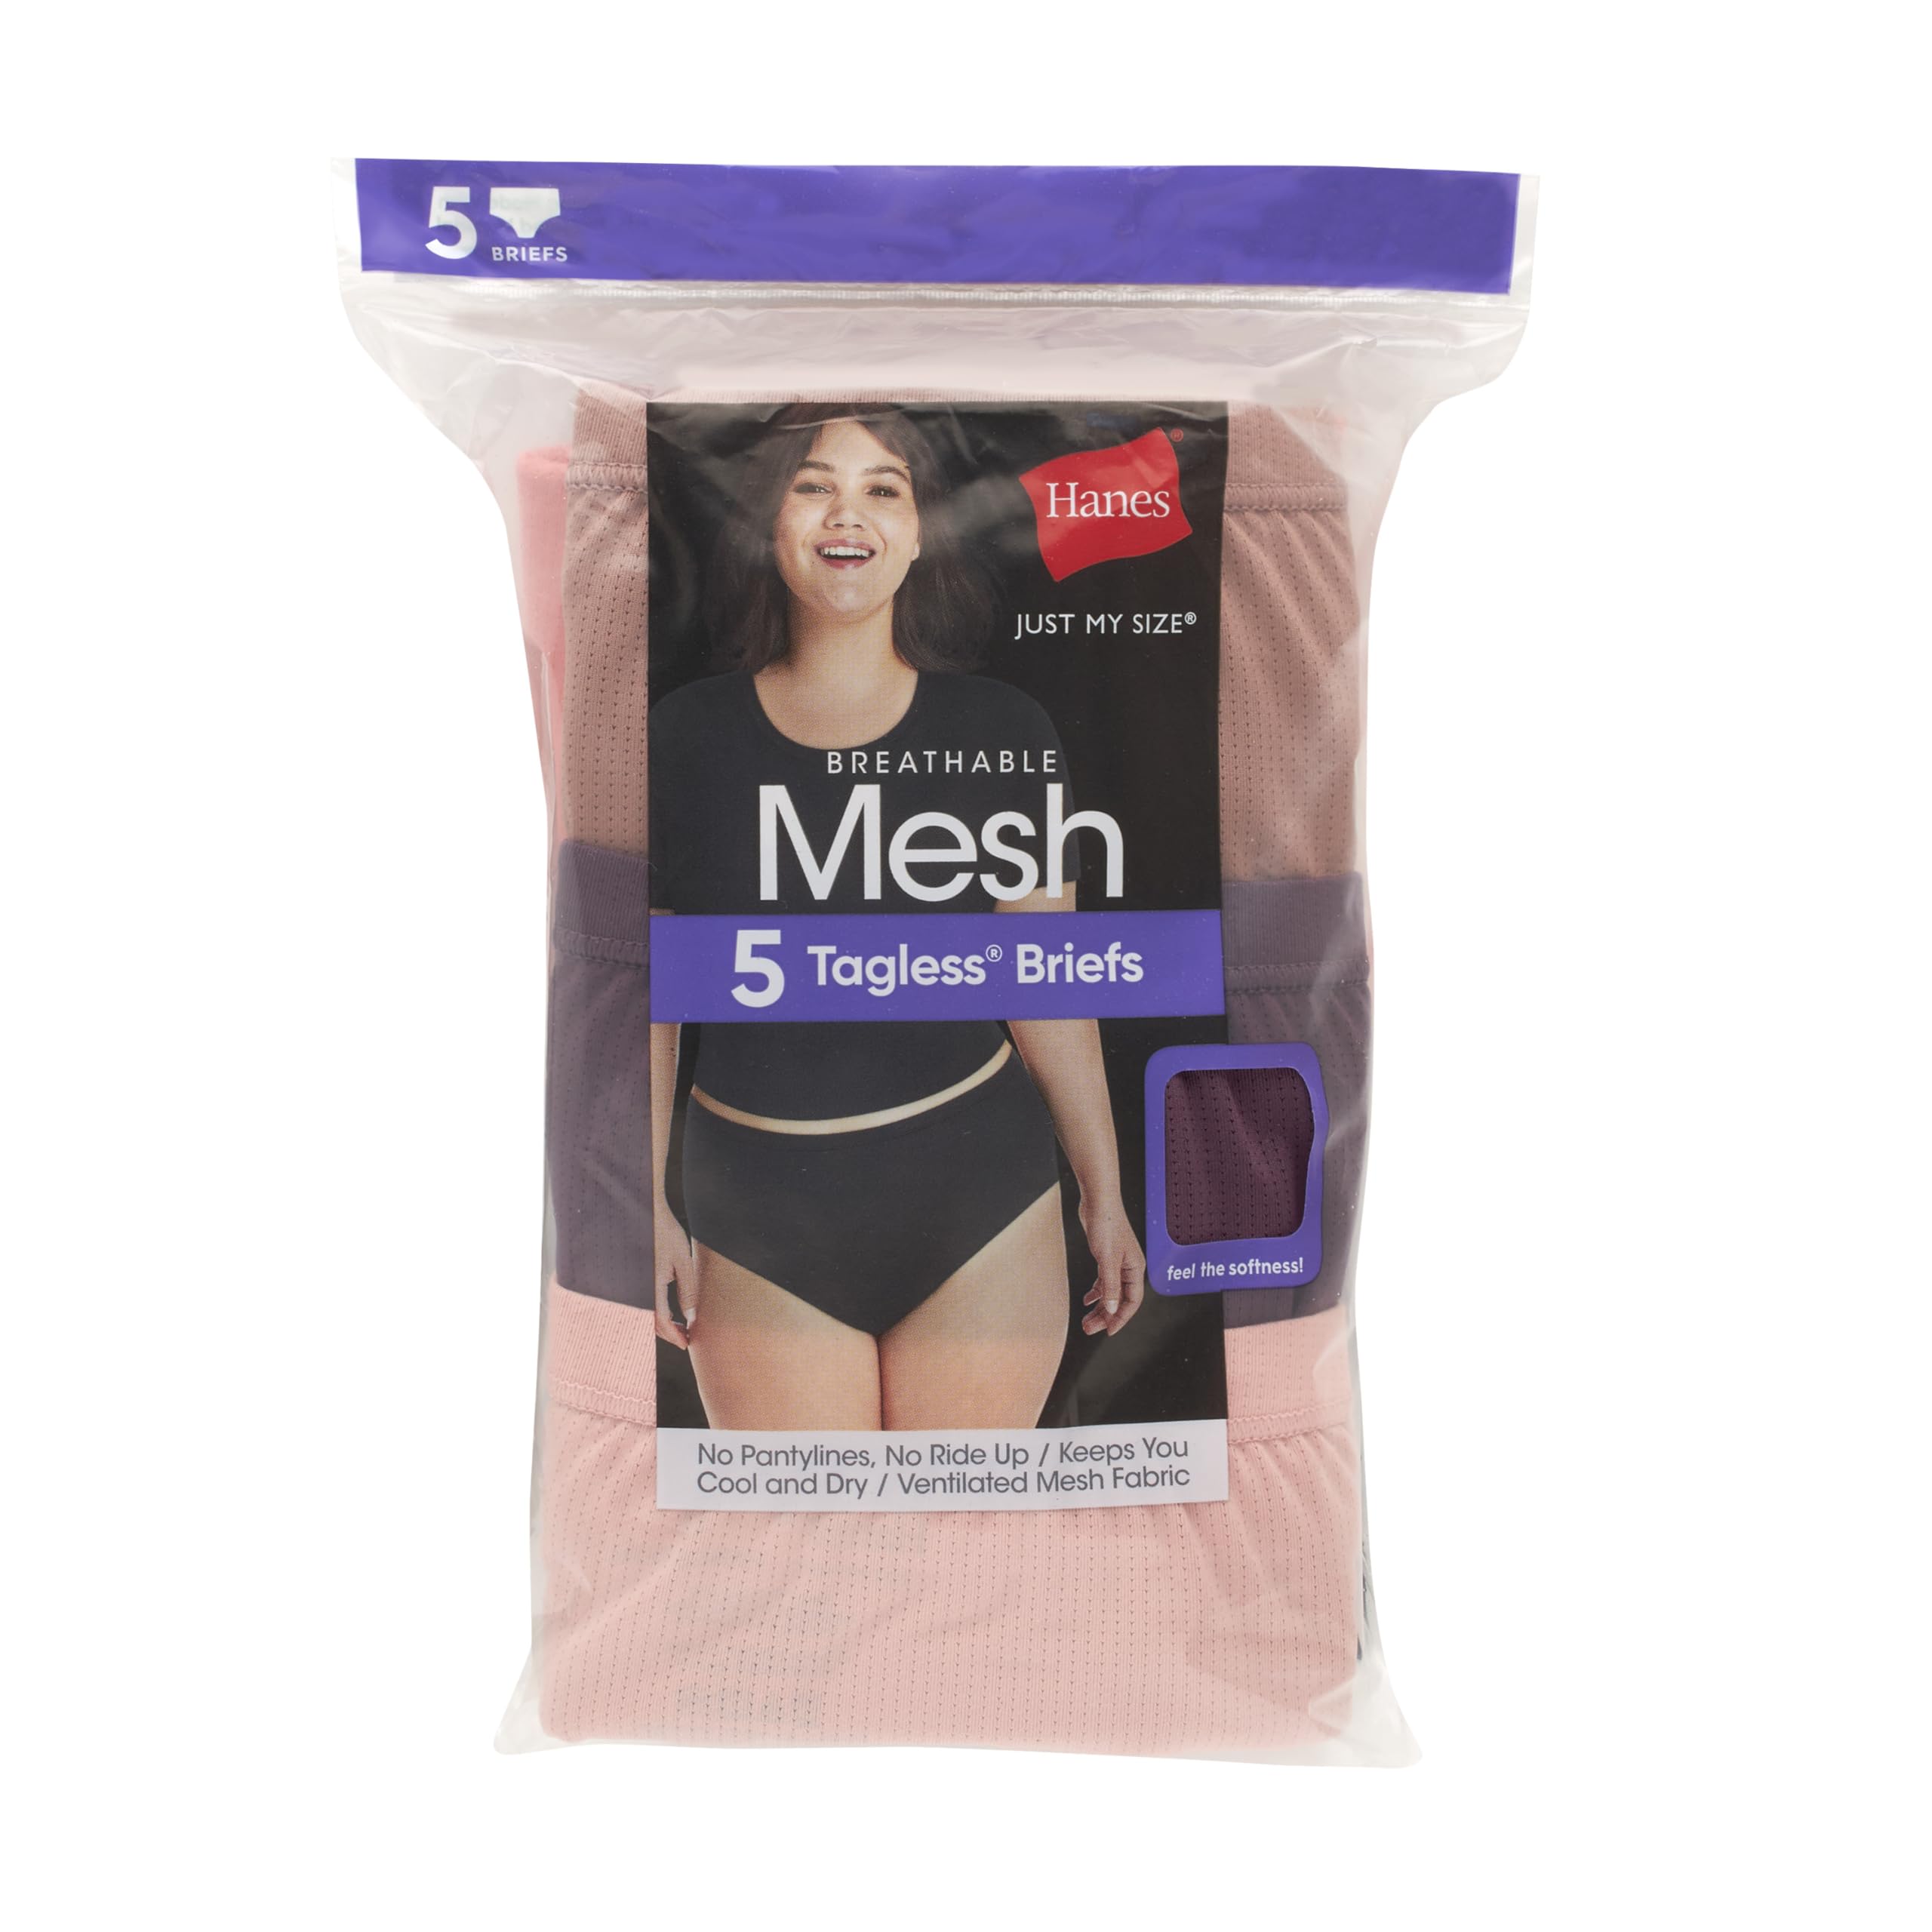 Hanes Mesh Brief, Breathable Panties for Women, No-Show Underwear, 5-Pack